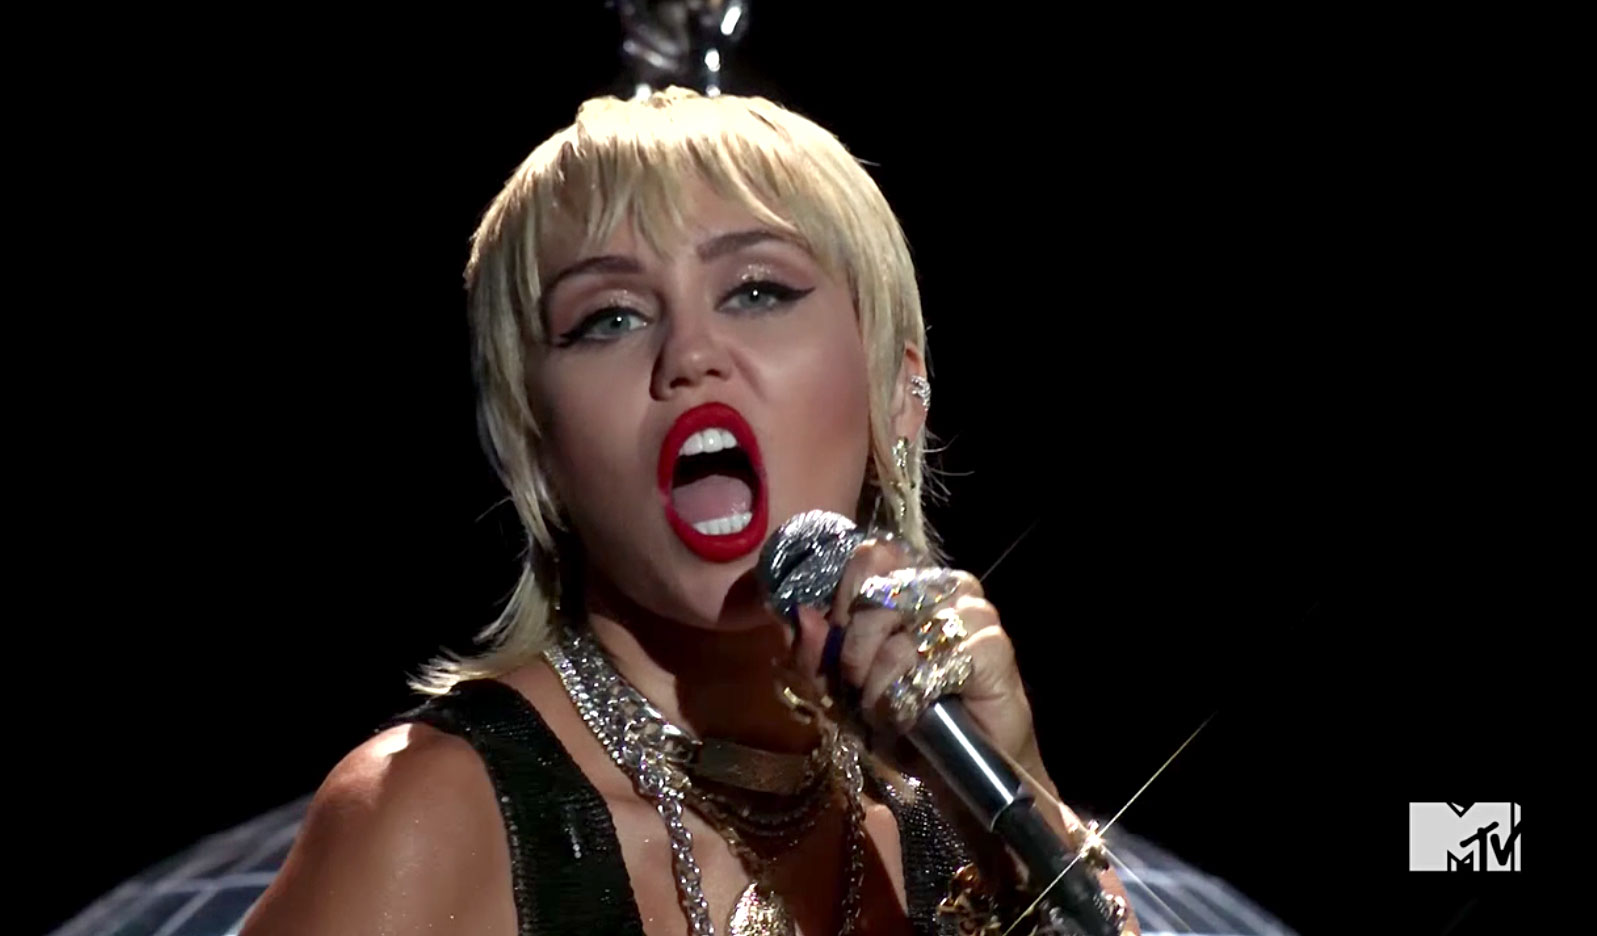 Watch Miley Cyrus Channel ‘Wrecking Ball’ With ‘Midnight